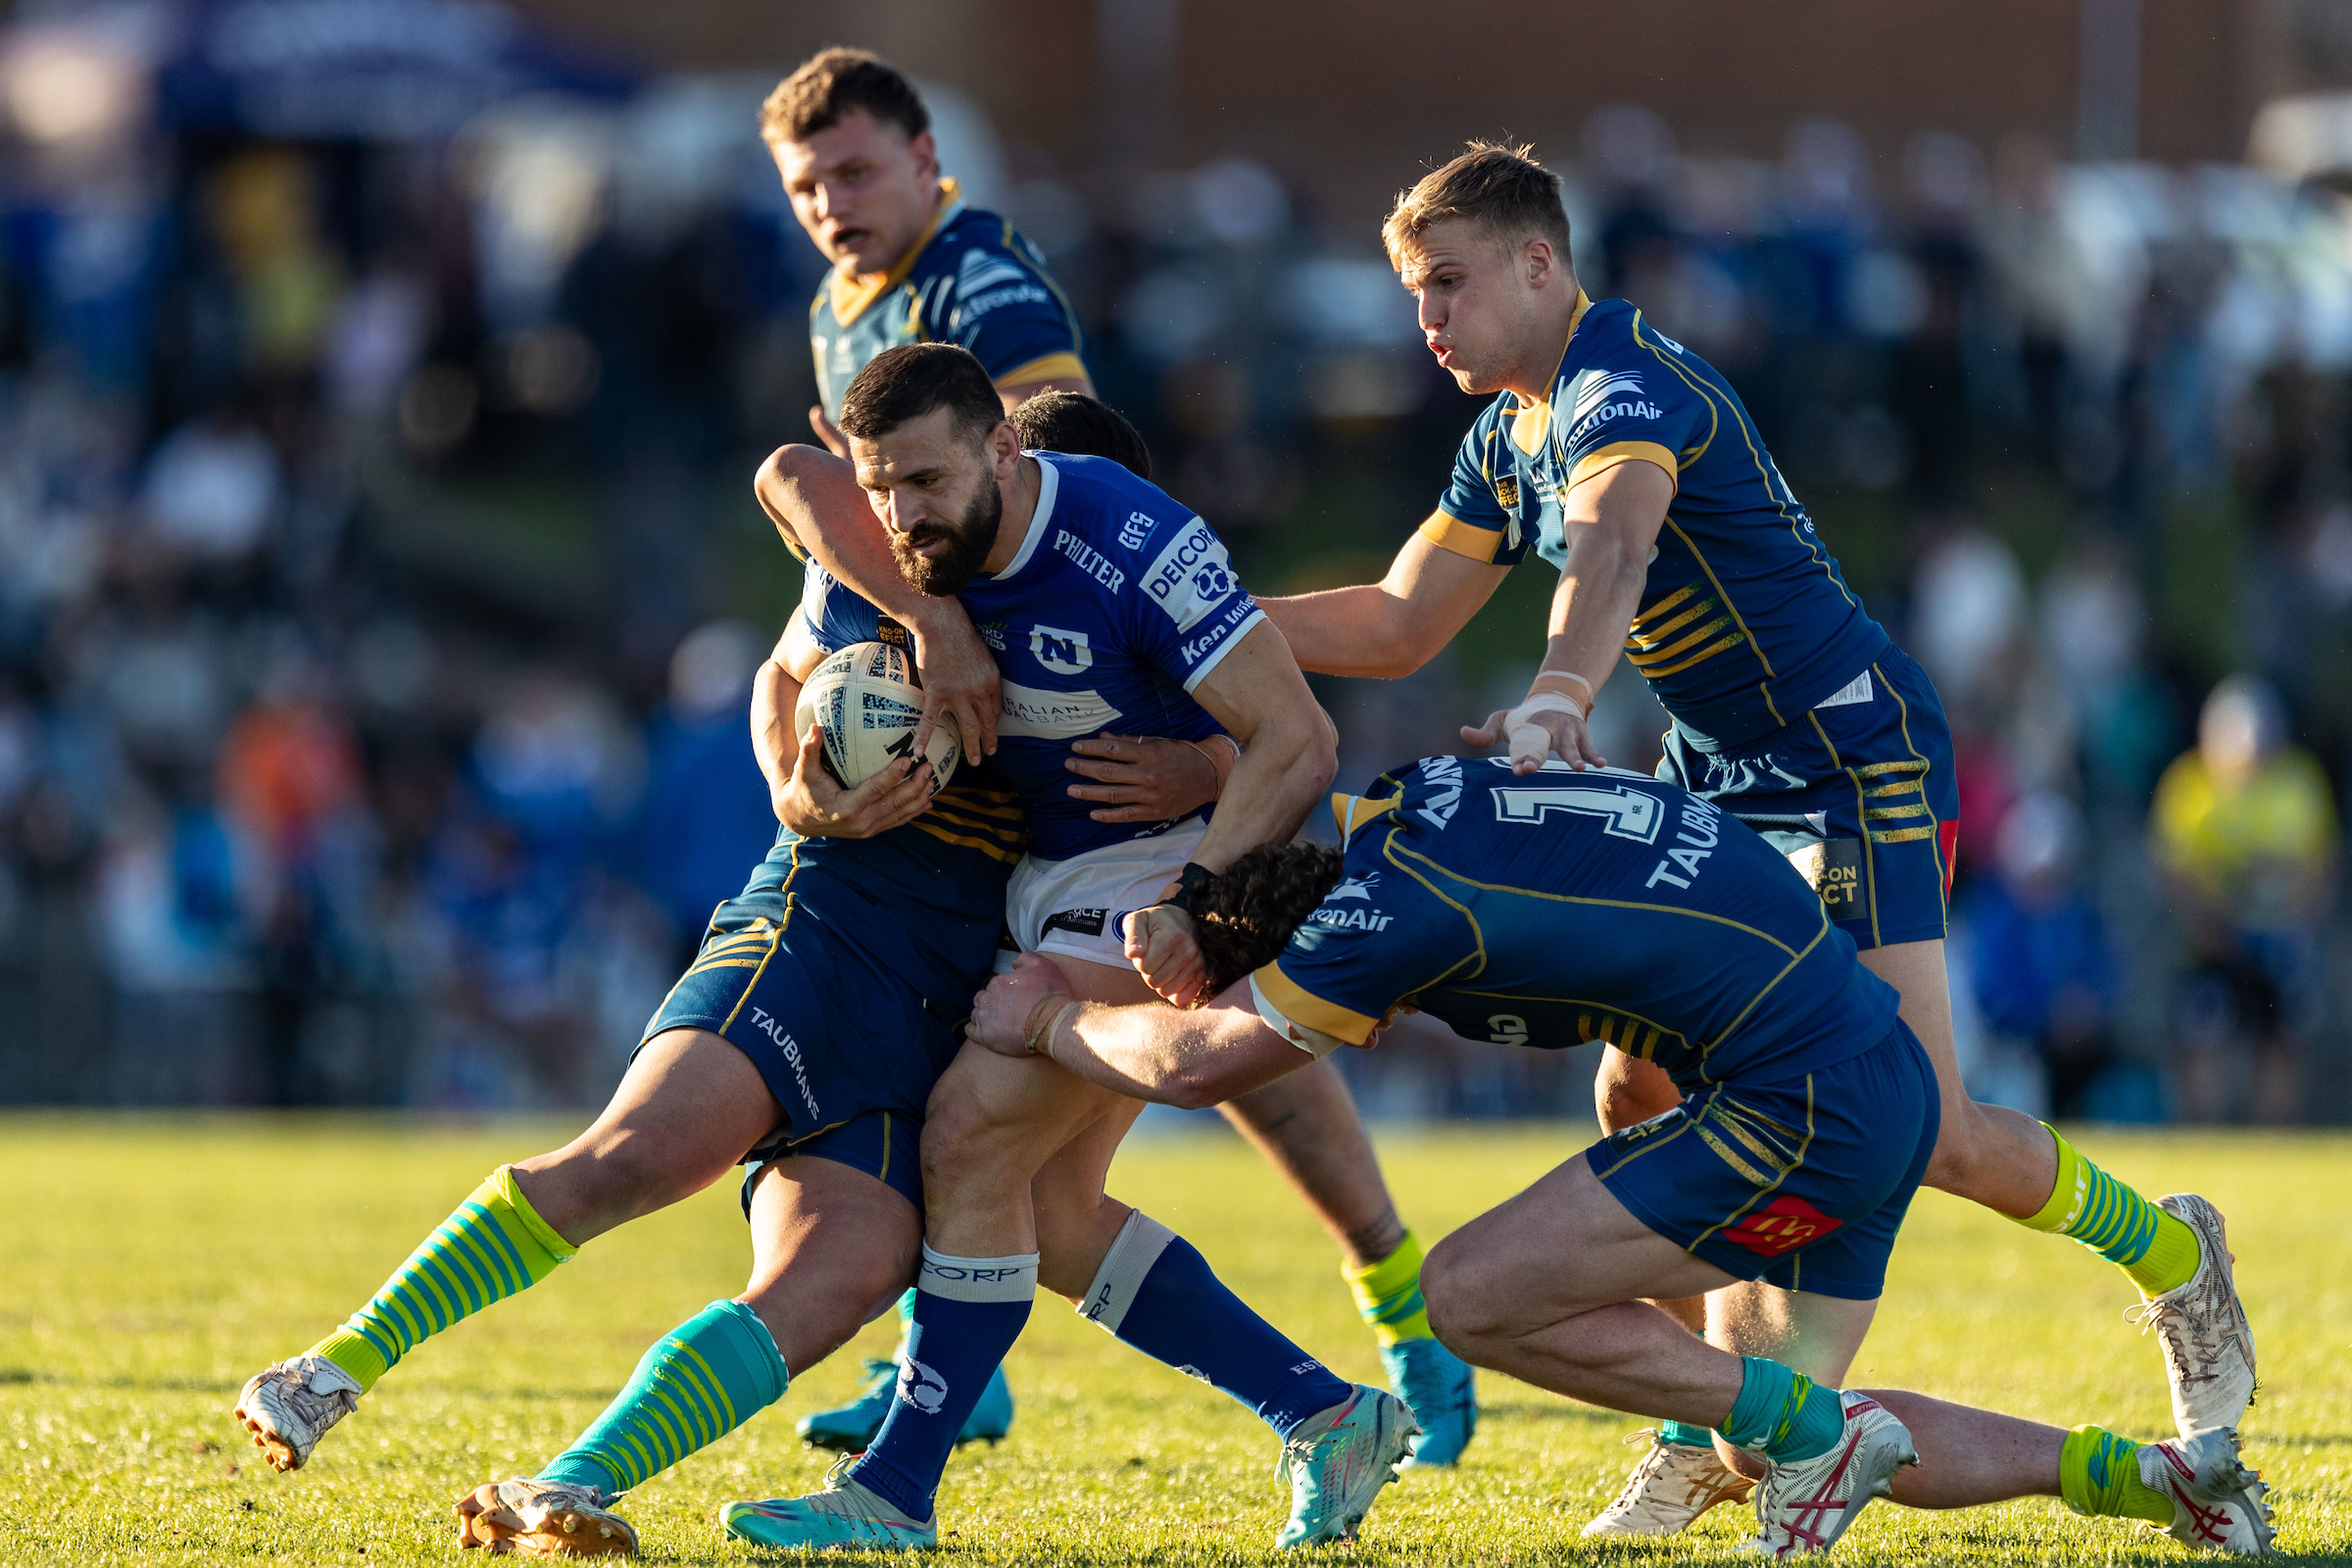 June 24, 2023 - Marrickville, New South Wales, Australia, Josh Mansour of the Newtown Jets during Round 17 of the NSWRL Knock On Effect NSW Cup at Henson Park in Marrickville, New South Wales. (Mario Facchini/mafphotography)